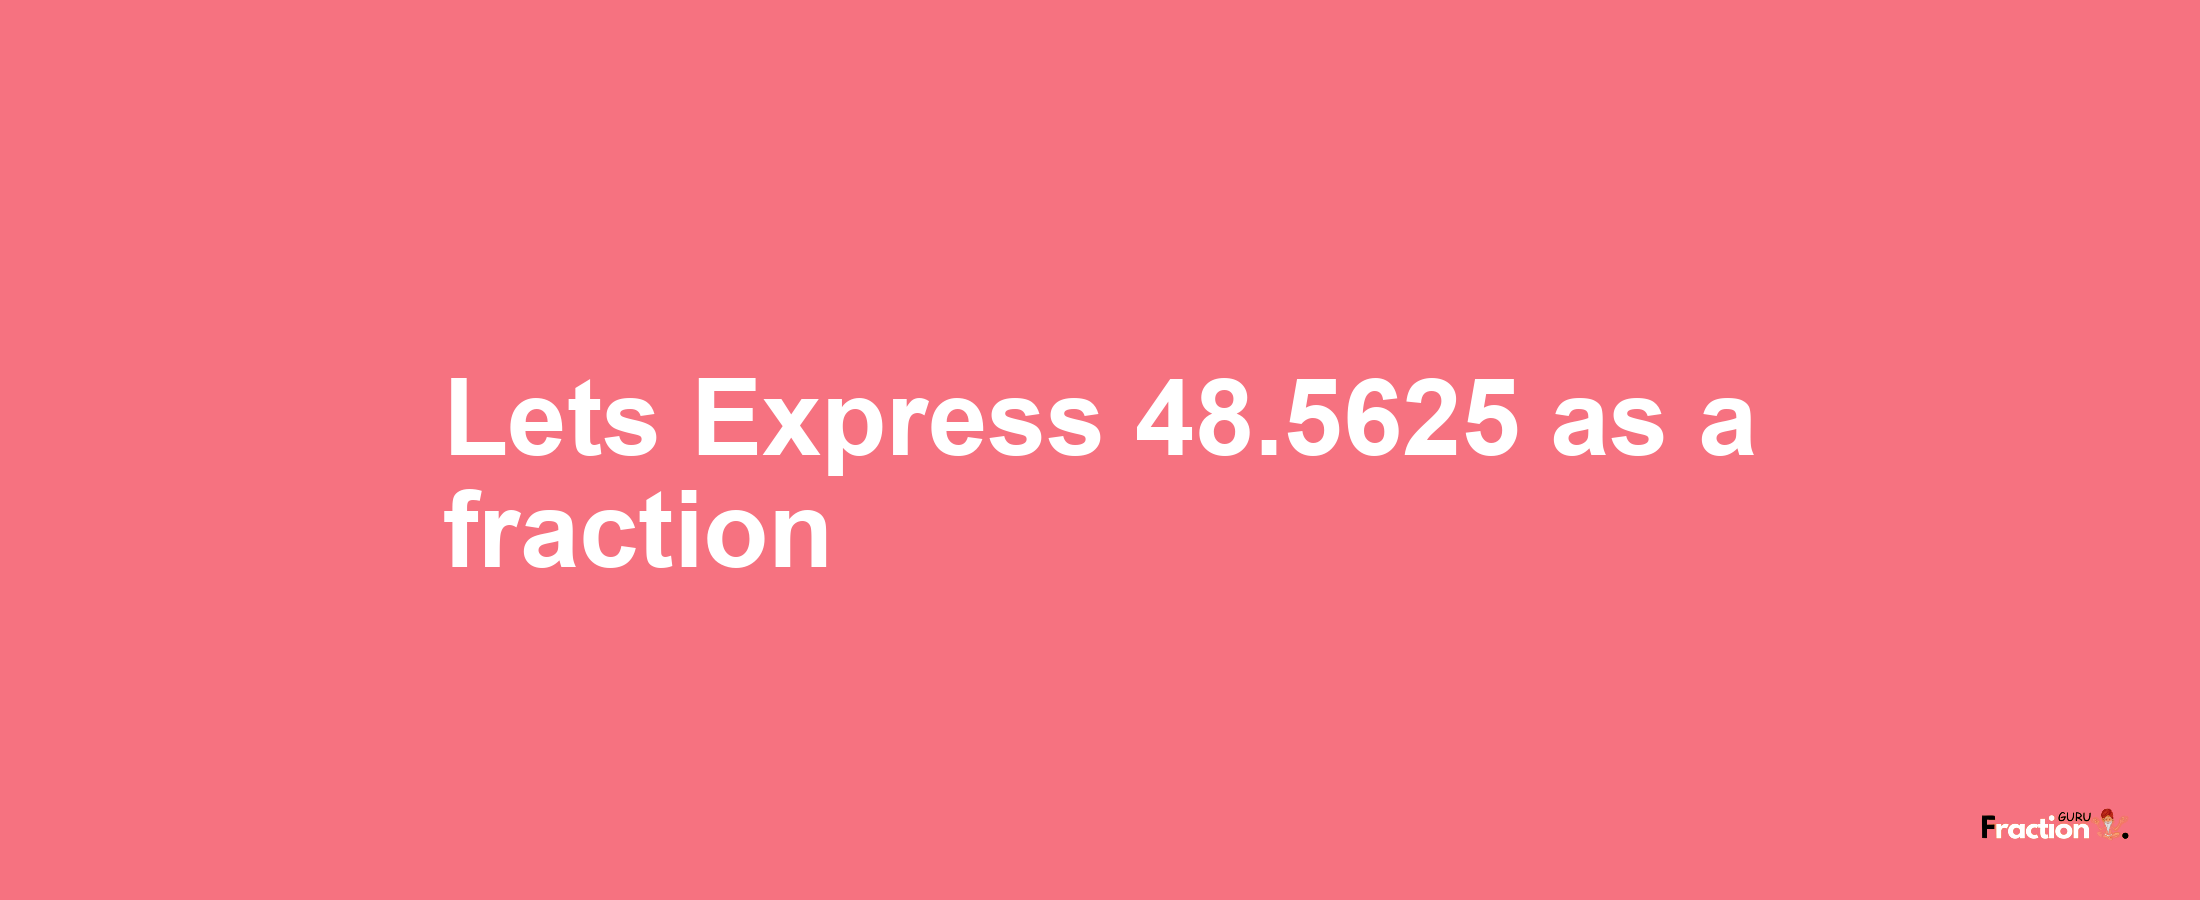 Lets Express 48.5625 as afraction